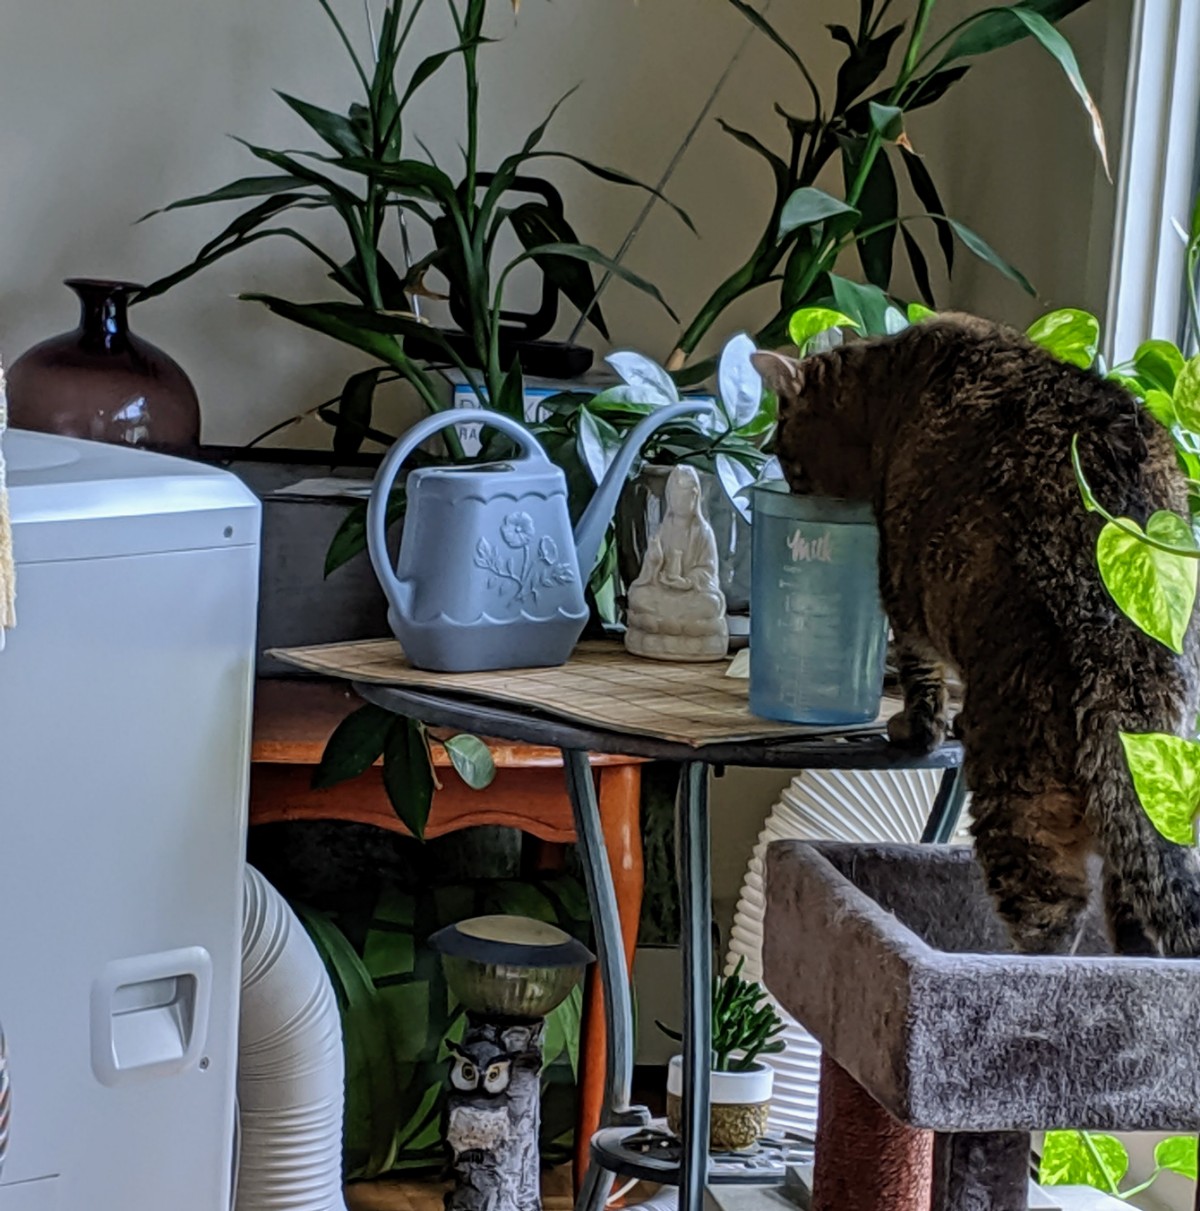 Tabby cat slurping from the plants' water jug